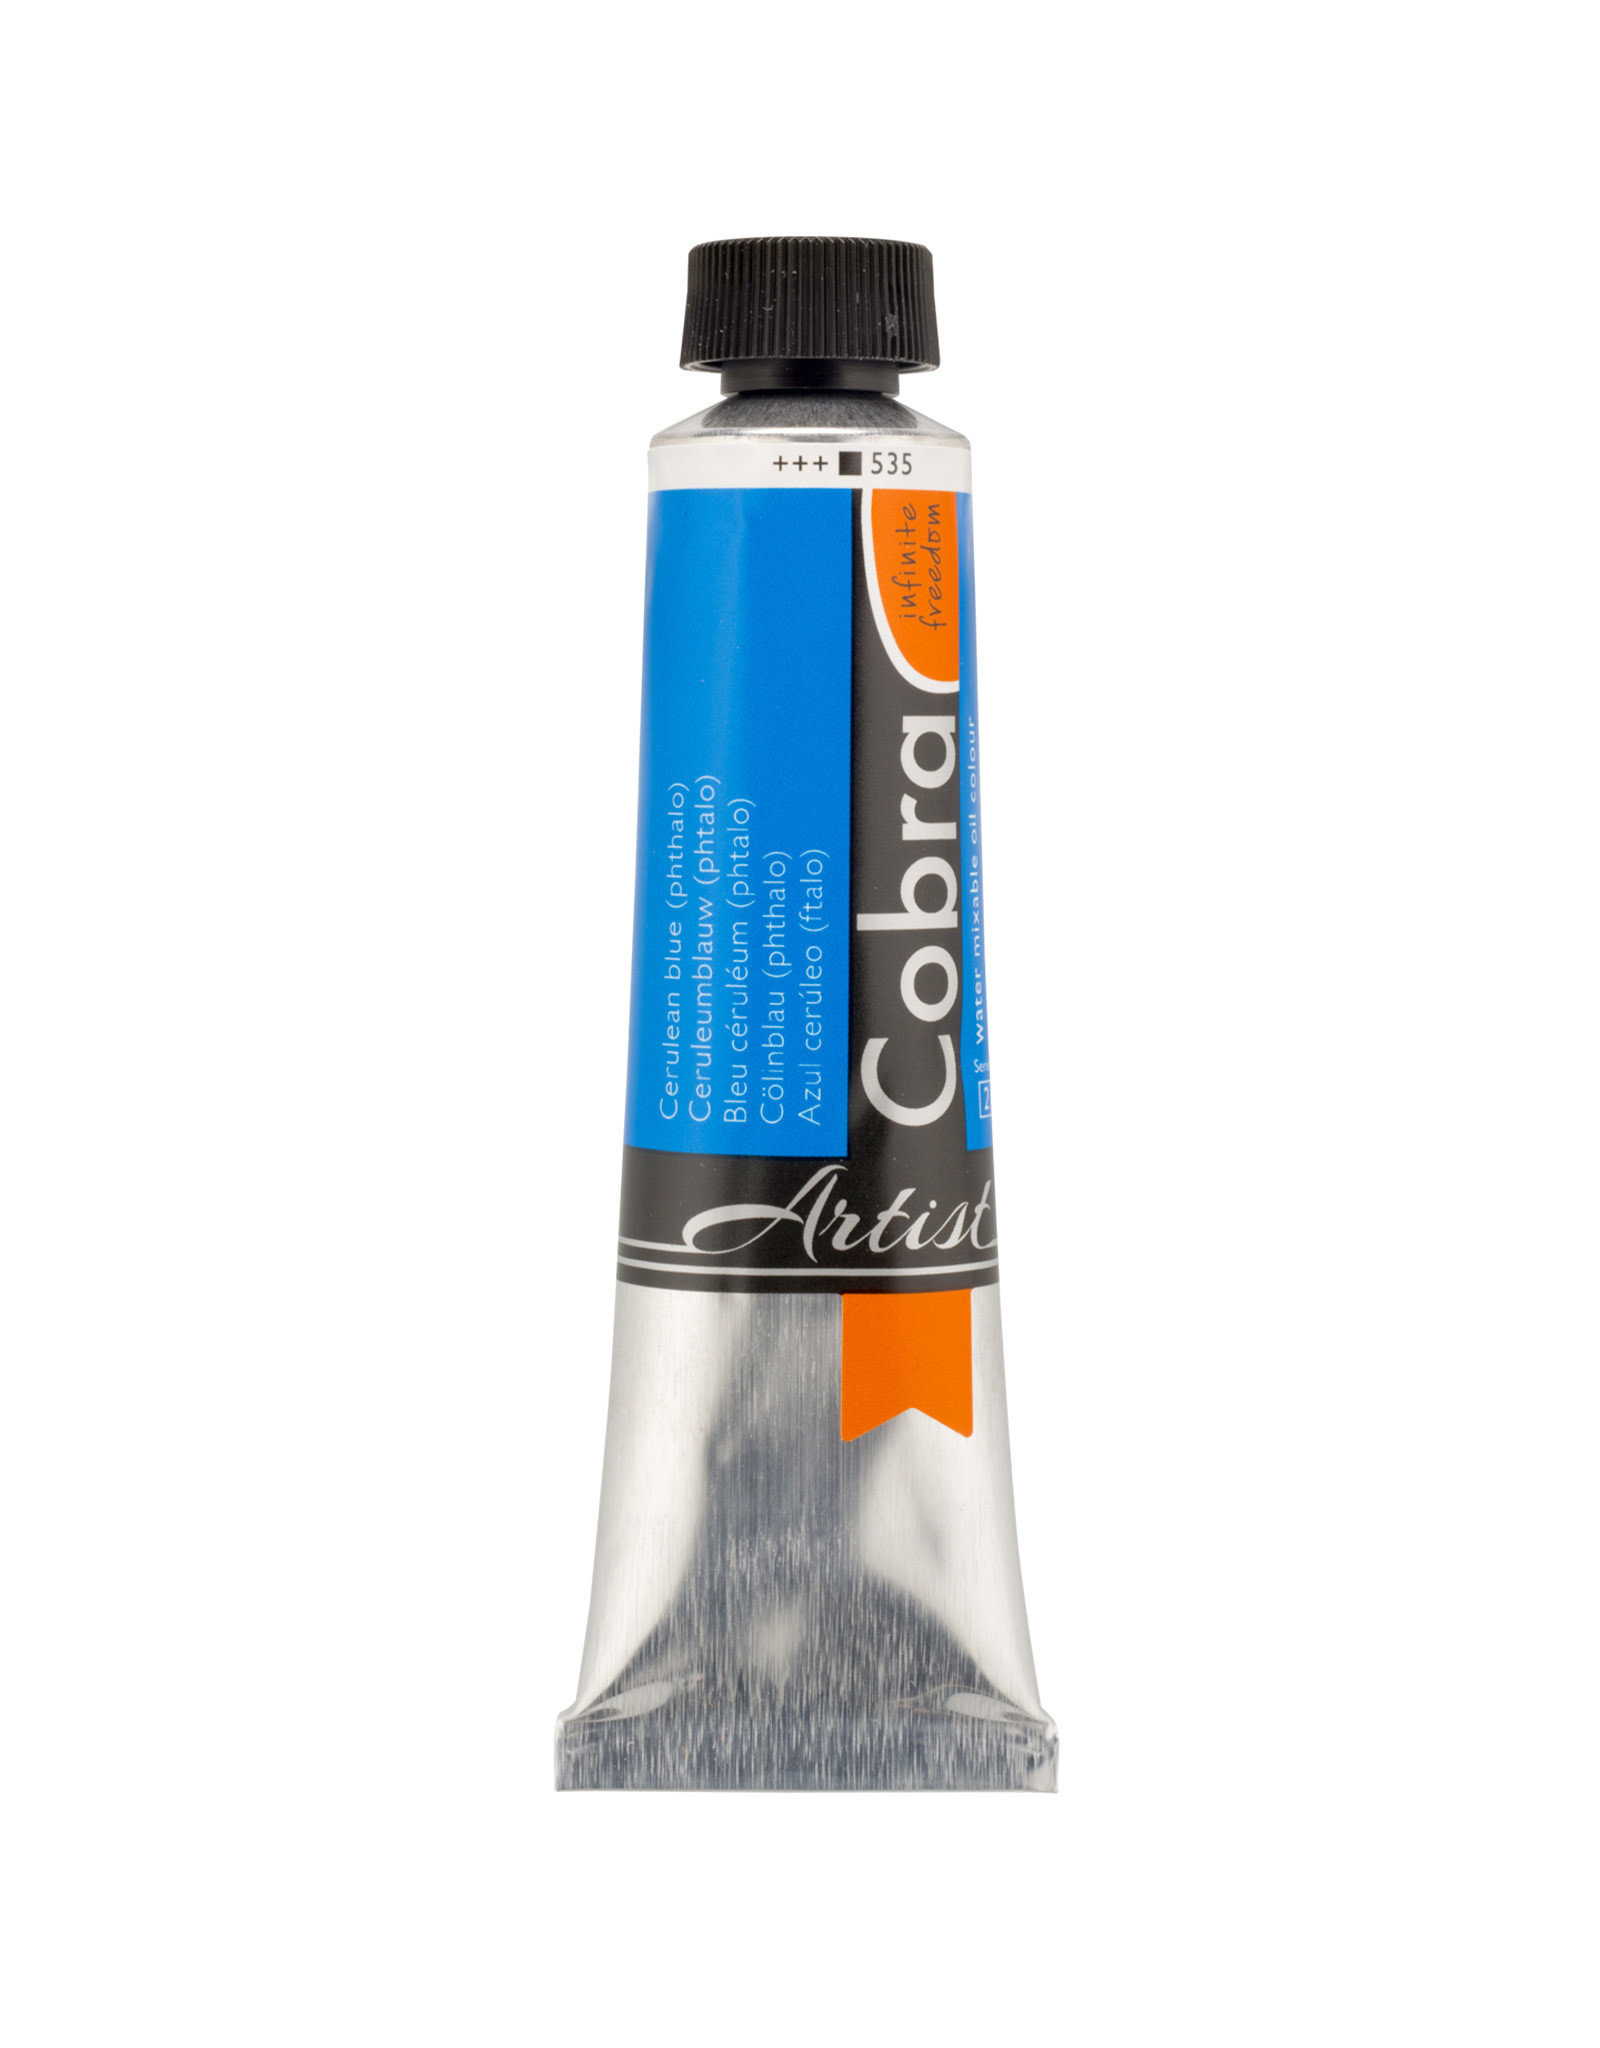 Royal Talens Cobra Water Mixable Artist Oils, Cerulean Blue (Phthalo) 40ml